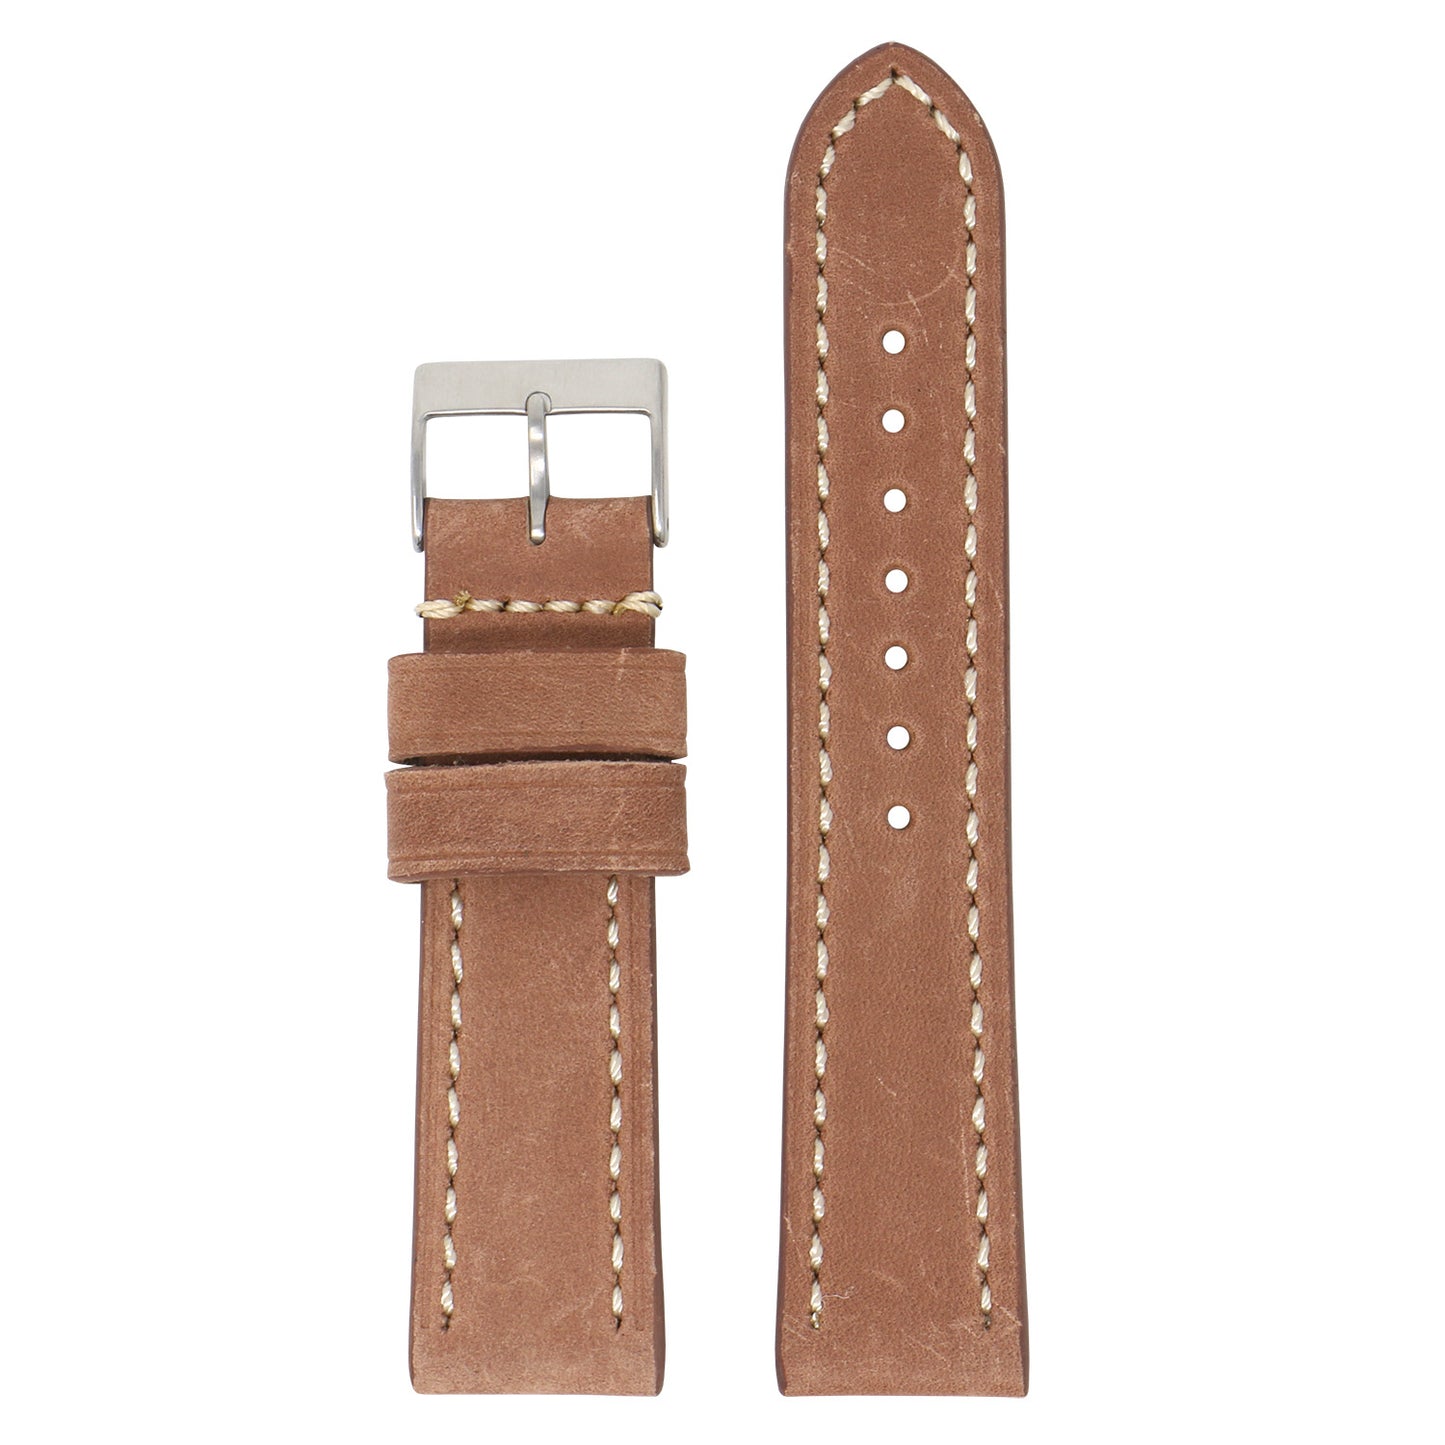 Vintage Leather Strap (Short, Standard, Extra Long) for Suunto 7